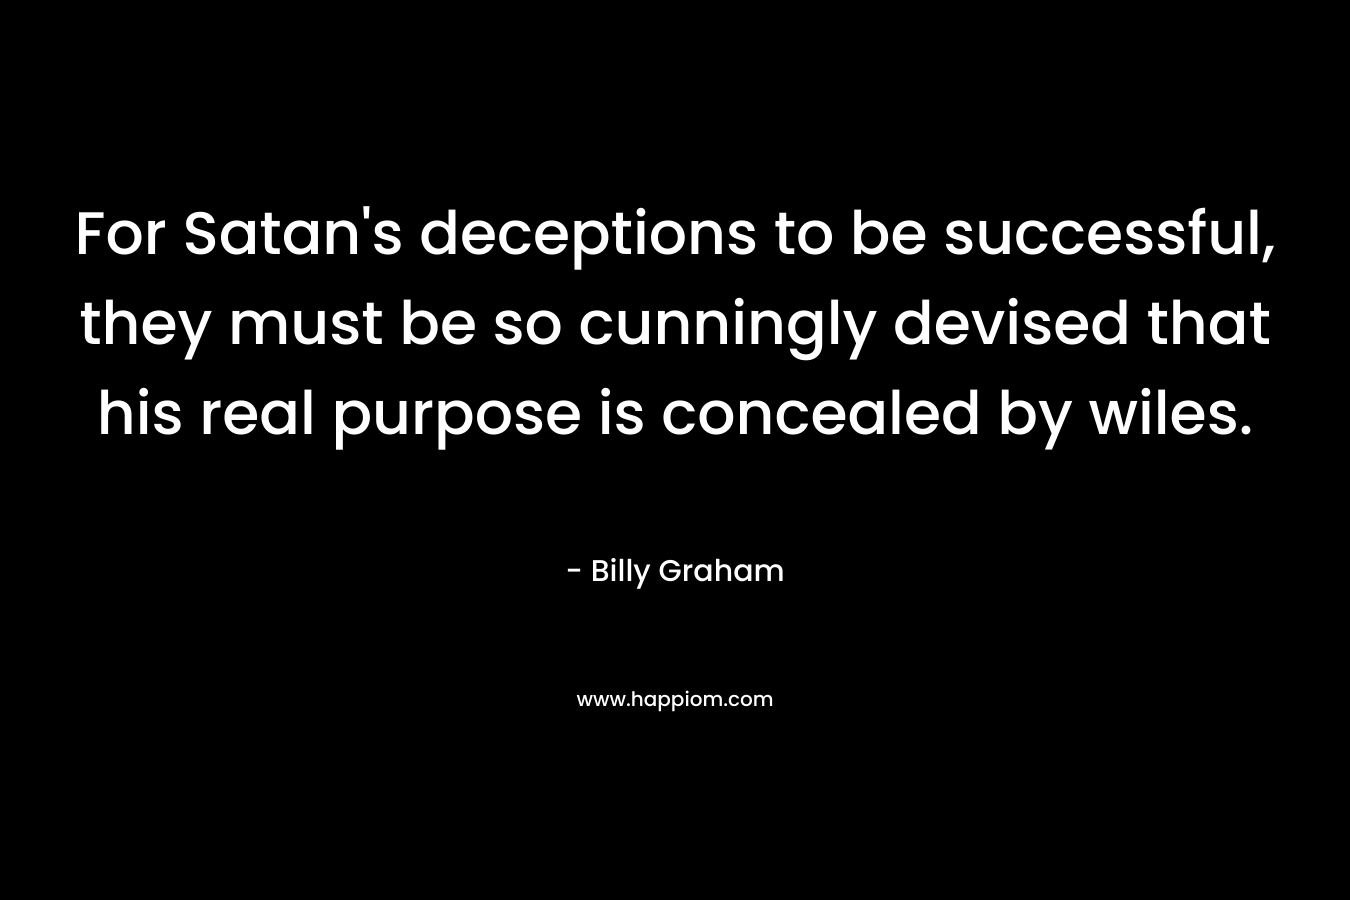 For Satan’s deceptions to be successful, they must be so cunningly devised that his real purpose is concealed by wiles. – Billy Graham